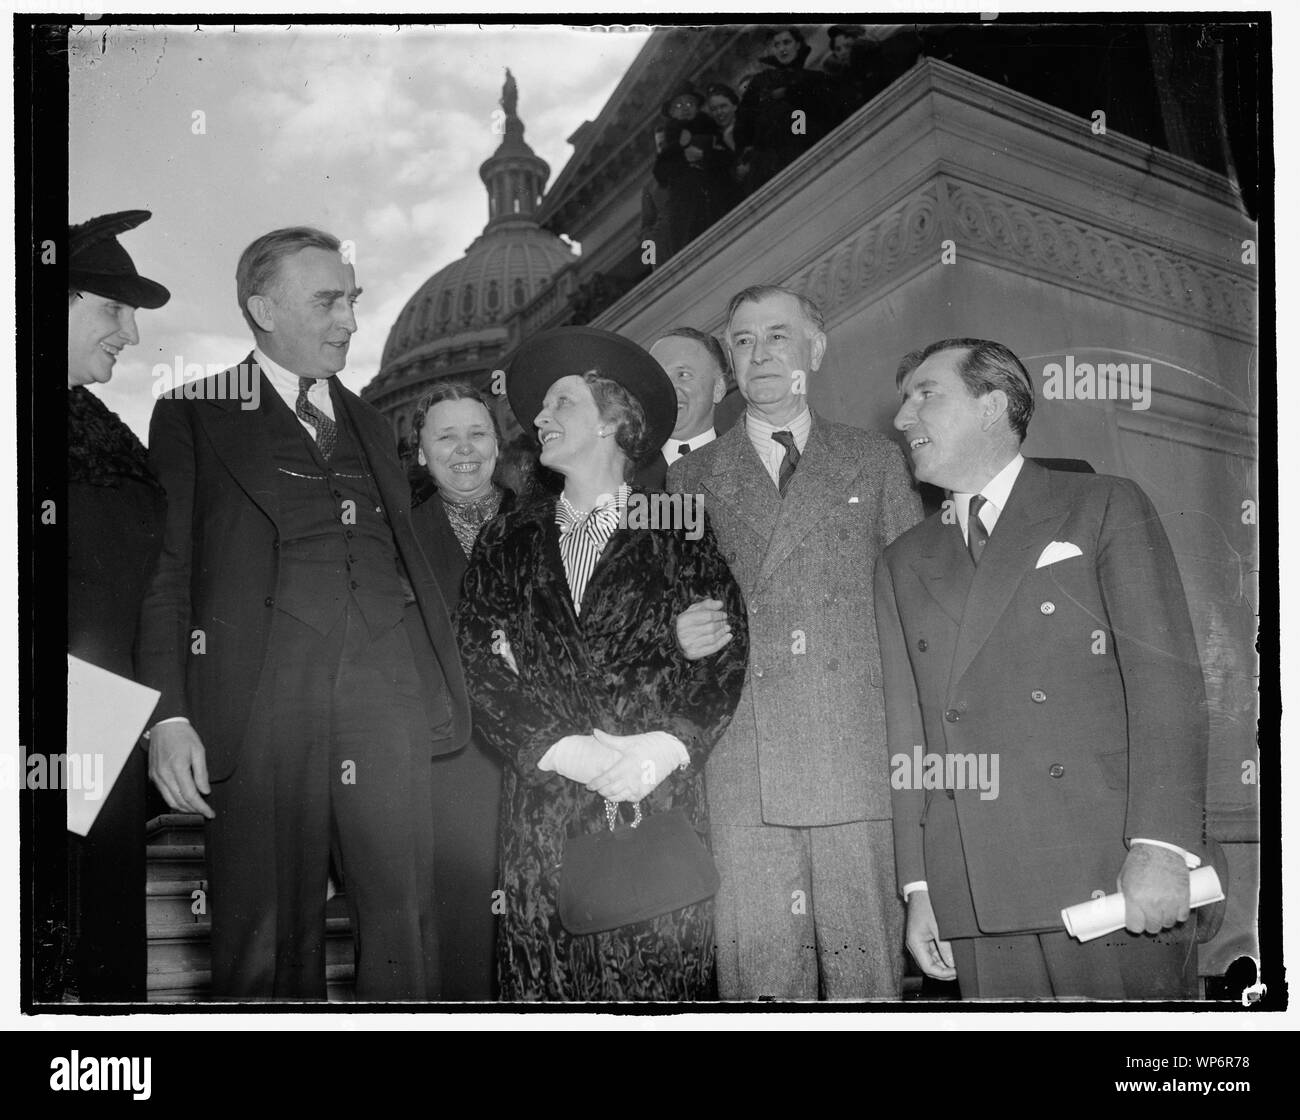 Lady Astor welcomed at Capitol. Washington, D.C., Jan. 27. Lady Astor, the former Nancy Langhorne of Virginia and now a member of the British Parliament, received a warm welcome when she looked in on the United States Senate today. In the photograph, left to right: Senator Joseph O'Mahoney, Senator Hattie Caraway, Lady Astor, Senator Harry Byrd, Senator Key Pittman, and Senator Claude A. Pepper, 1/27/38 Stock Photo